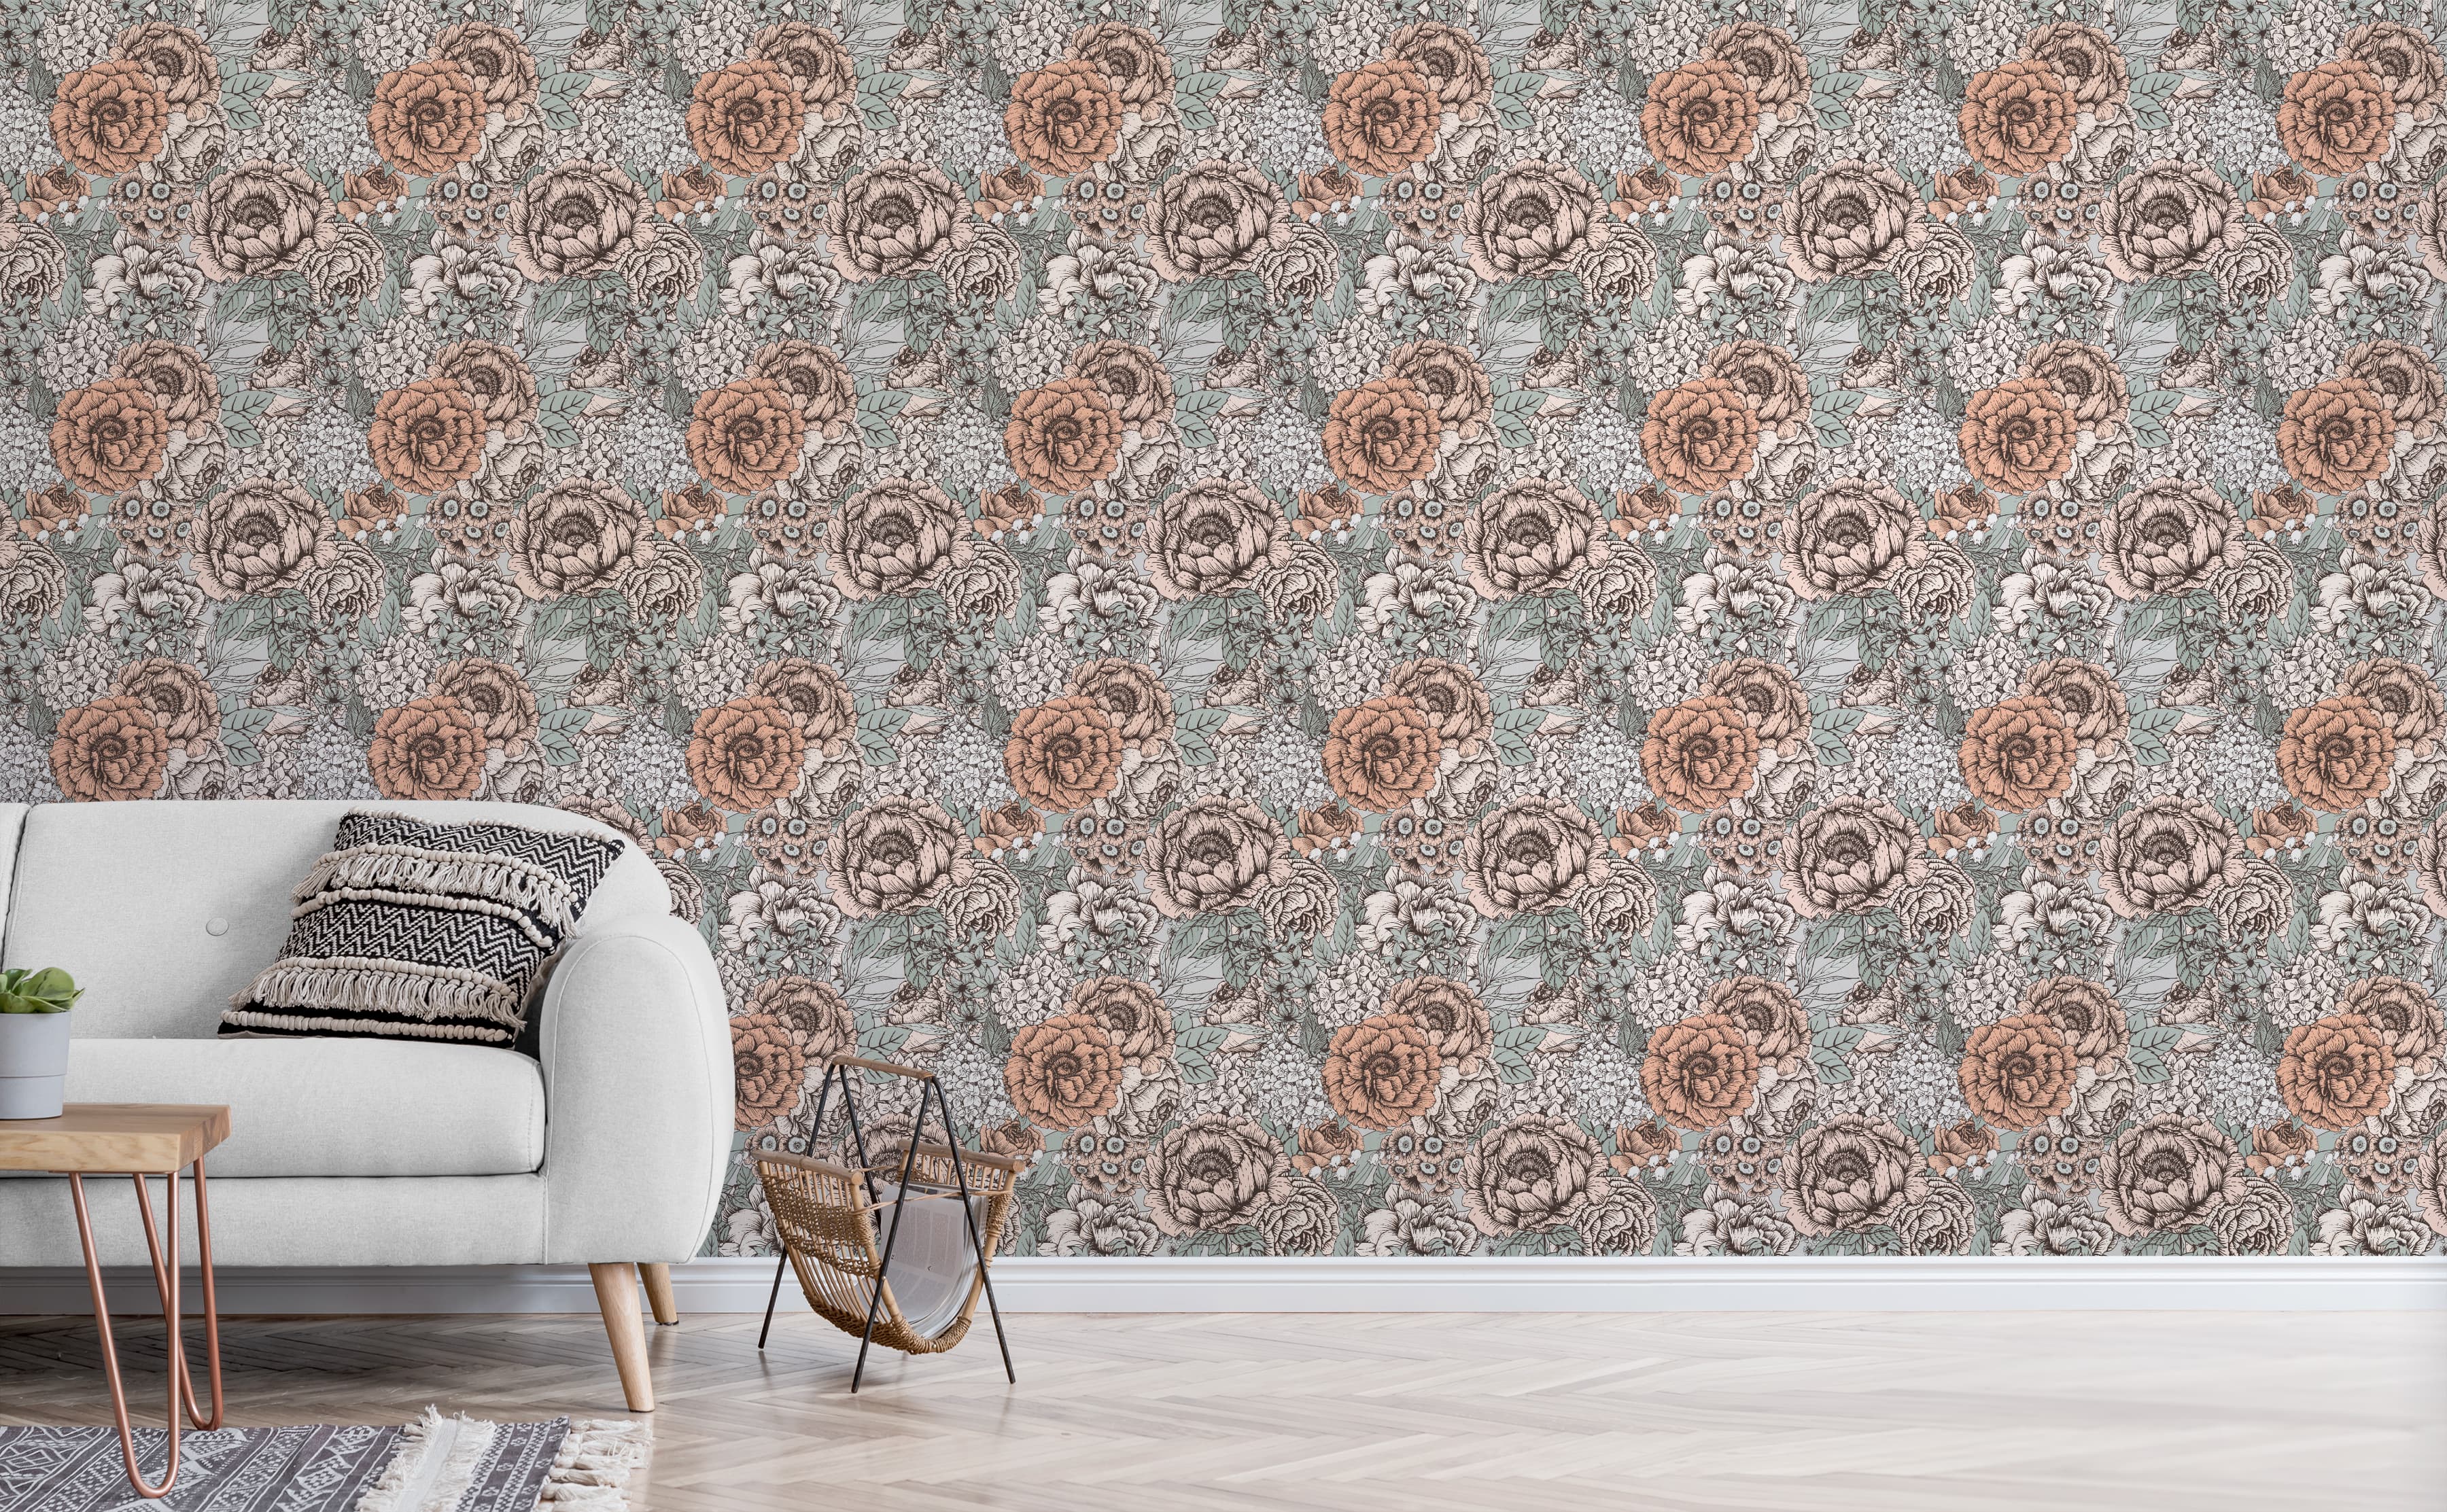 Smiley Flower Fabric, Wallpaper and Home Decor